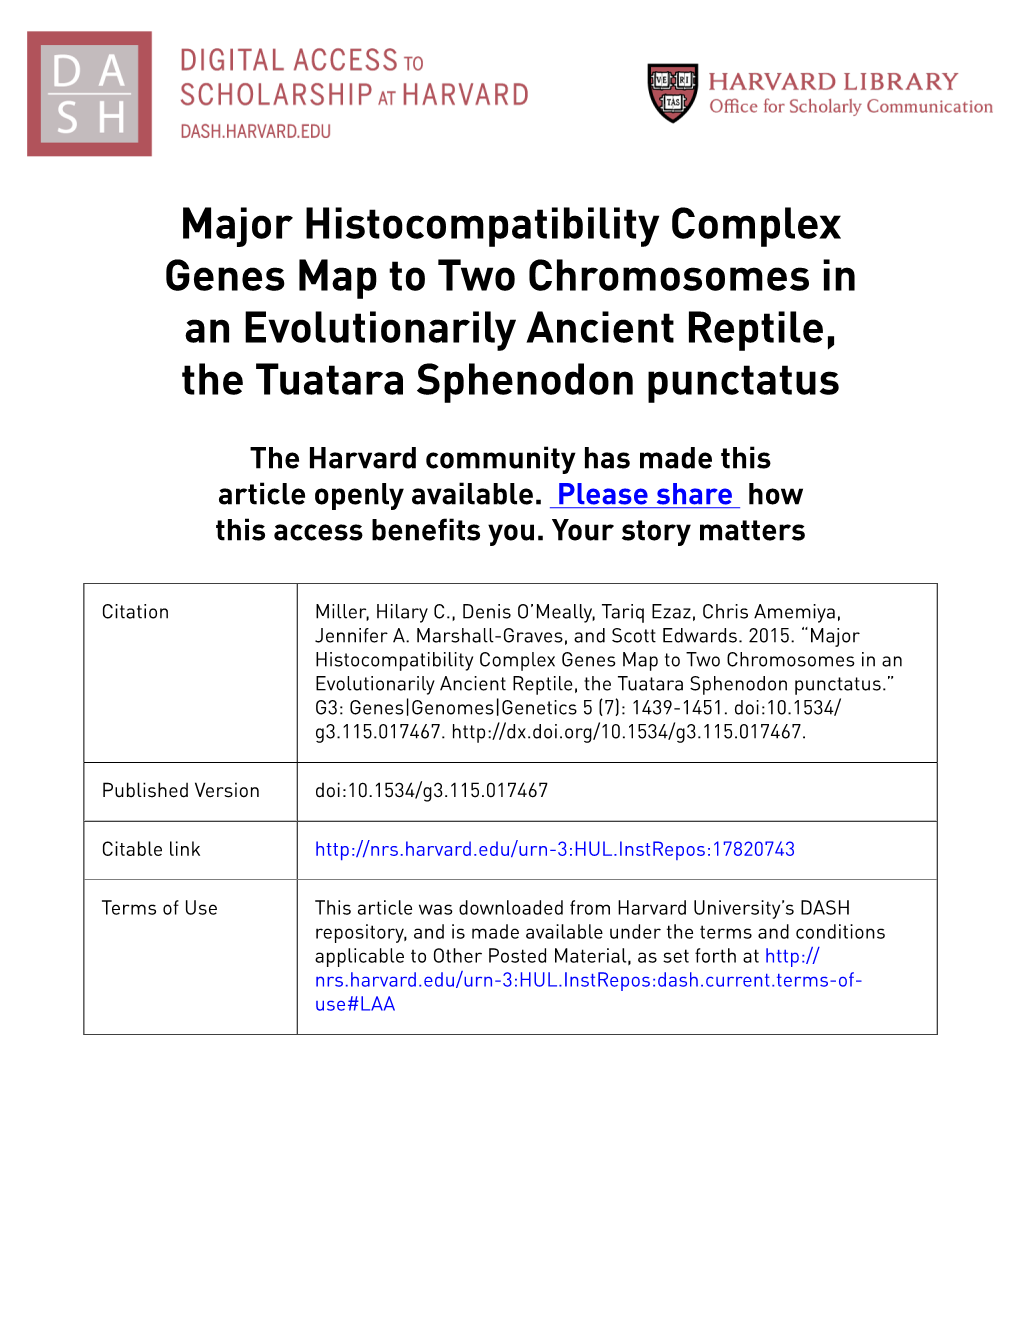 Major Histocompatibility Complex Genes Map to Two Chromosomes in an Evolutionarily Ancient Reptile, the Tuatara Sphenodon Punctatus